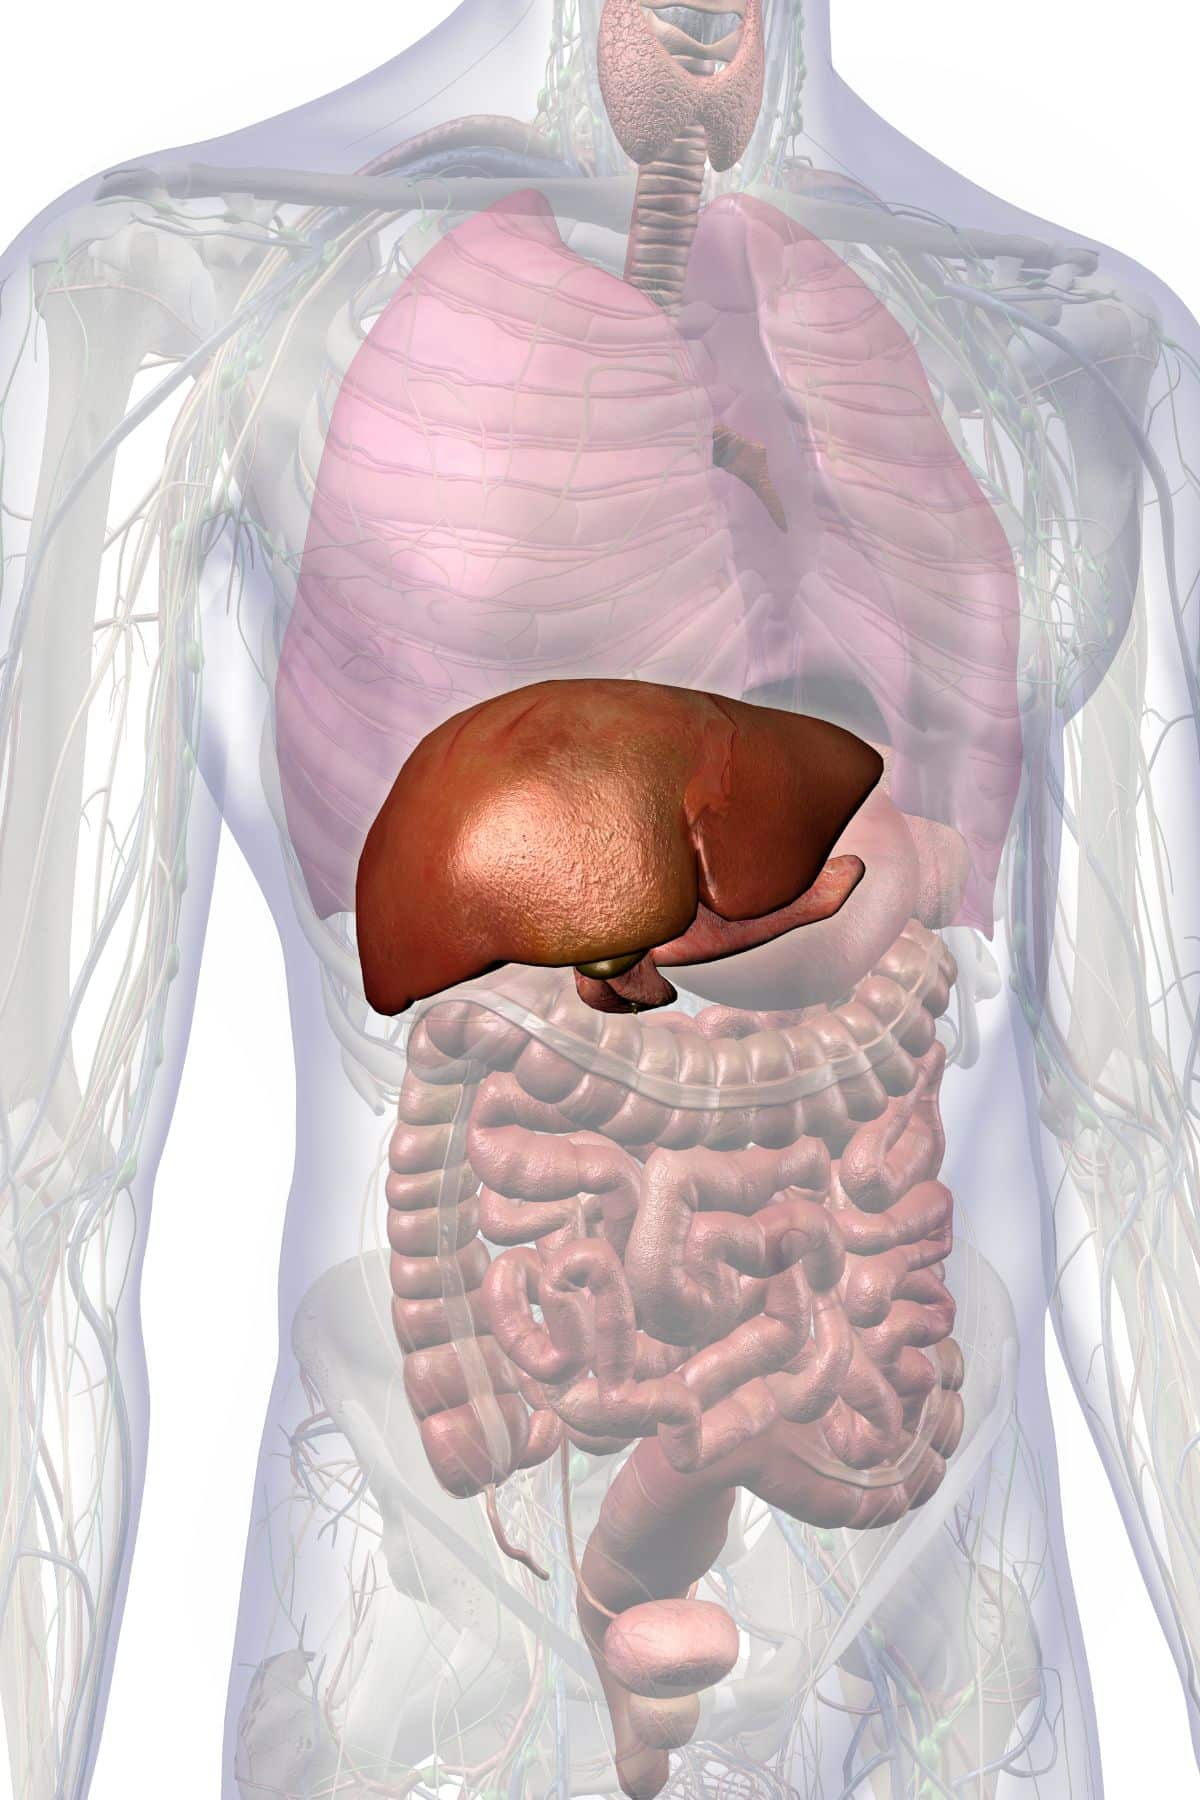 an illustration of a liver's placement in the human body.